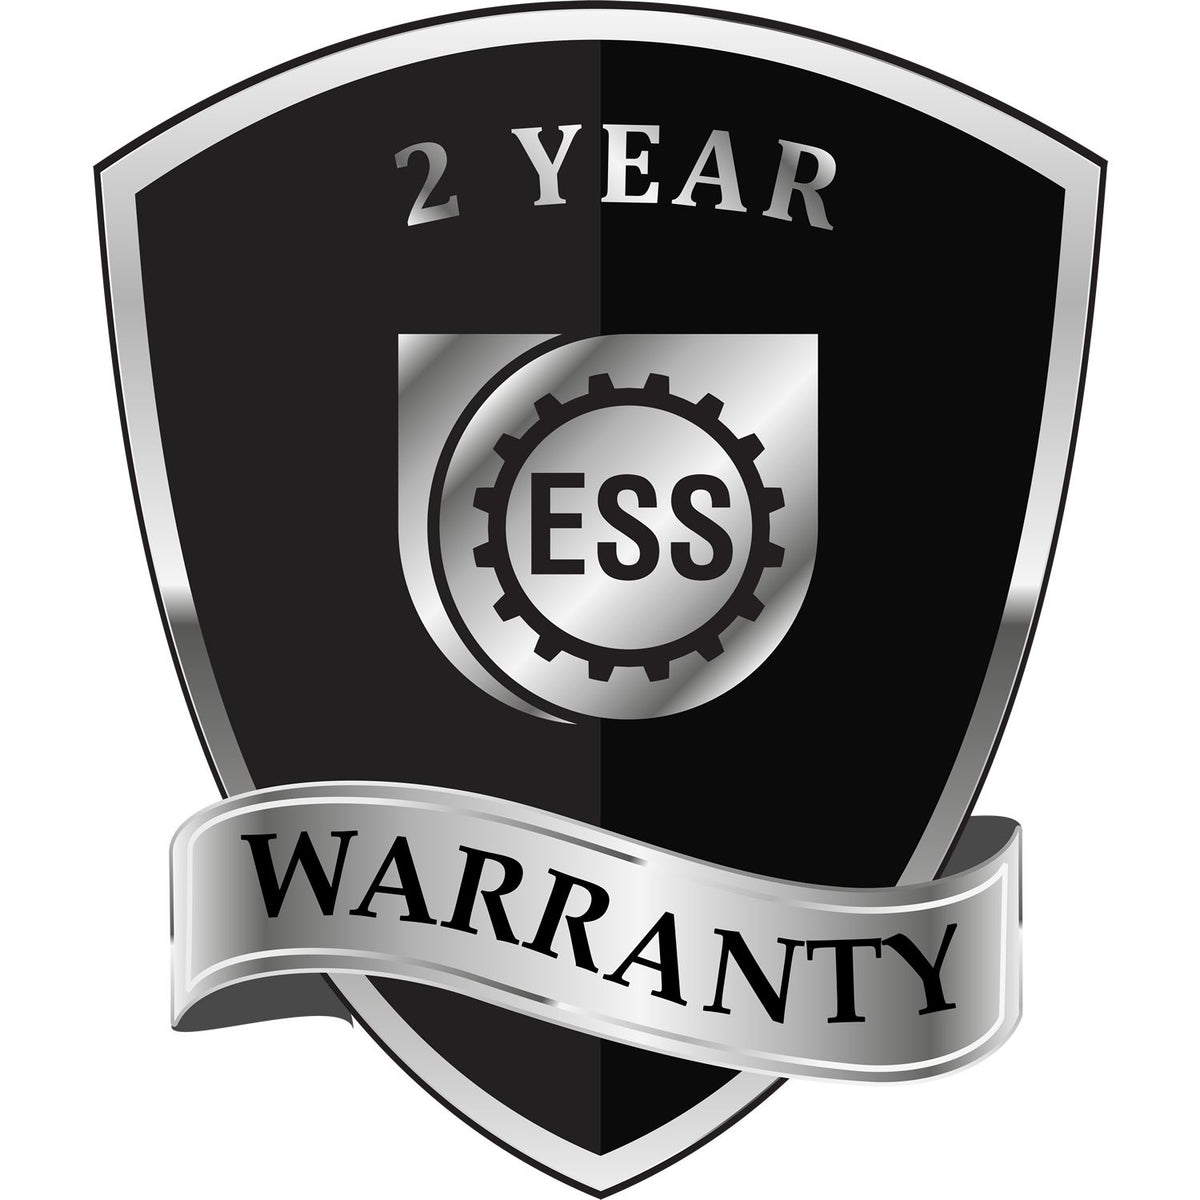 A badge or emblem showing a warranty icon for the Long Reach Delaware PE Seal